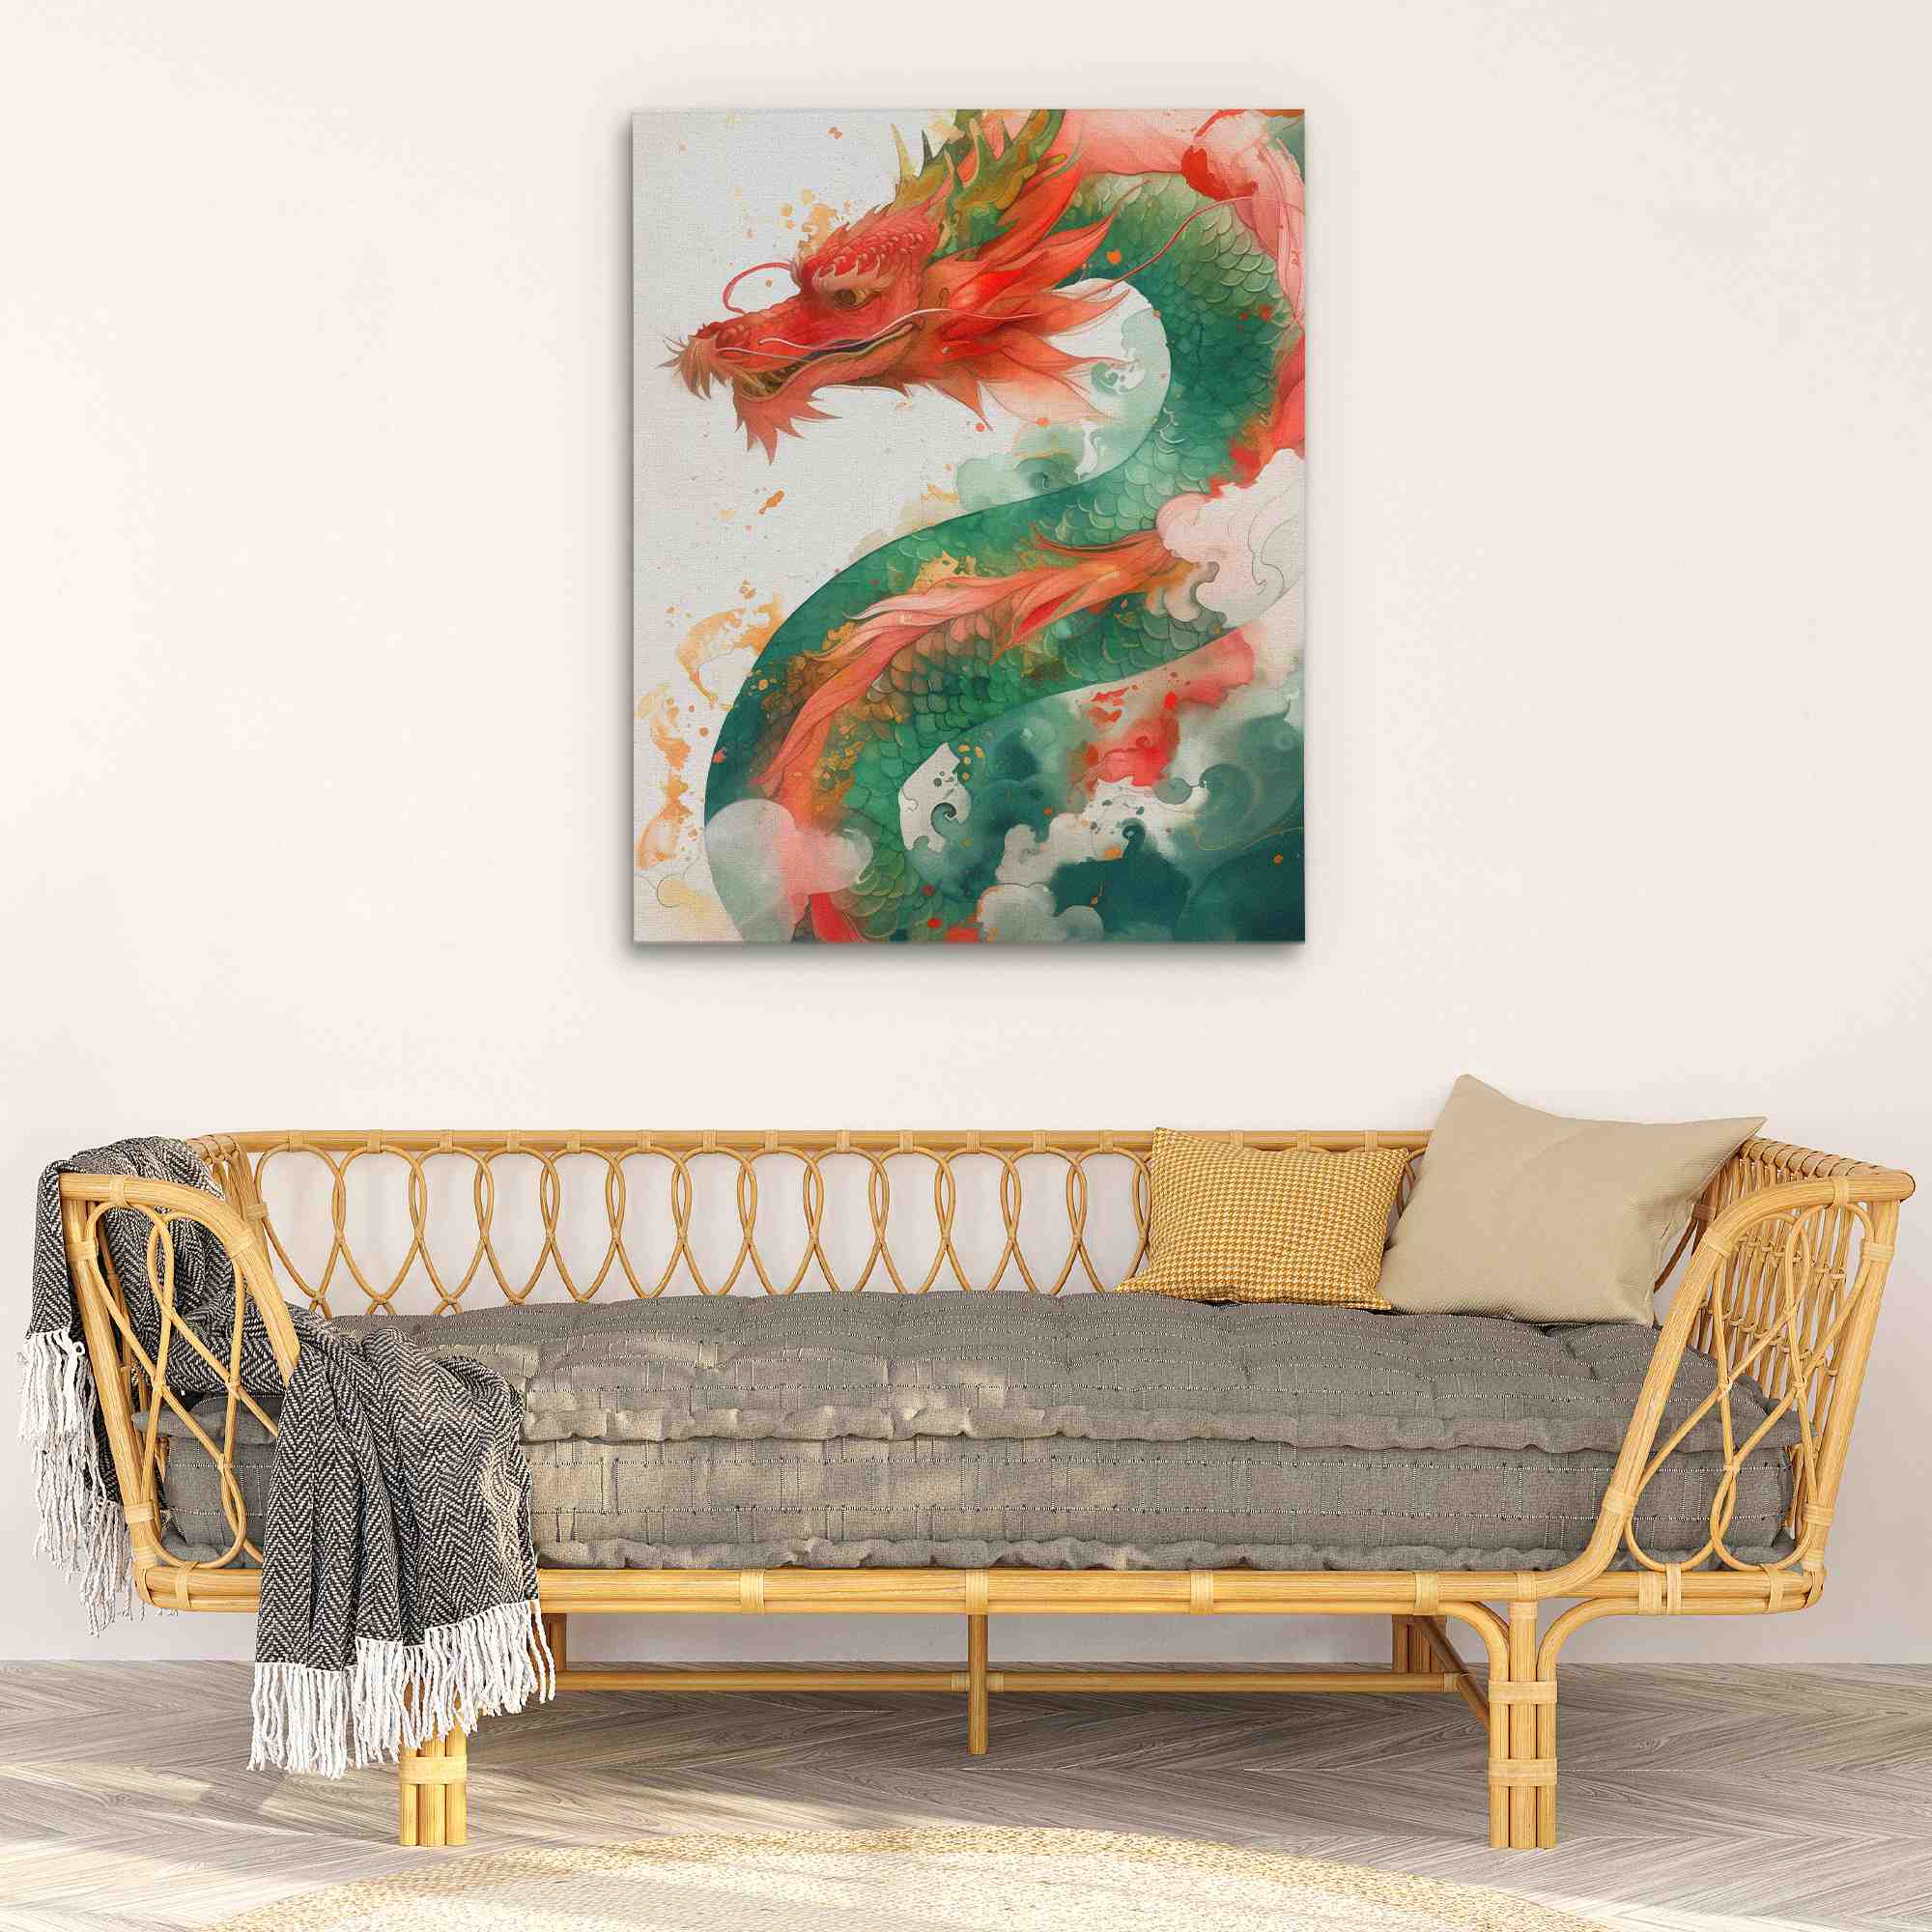 a painting of a red and green dragon on a white background